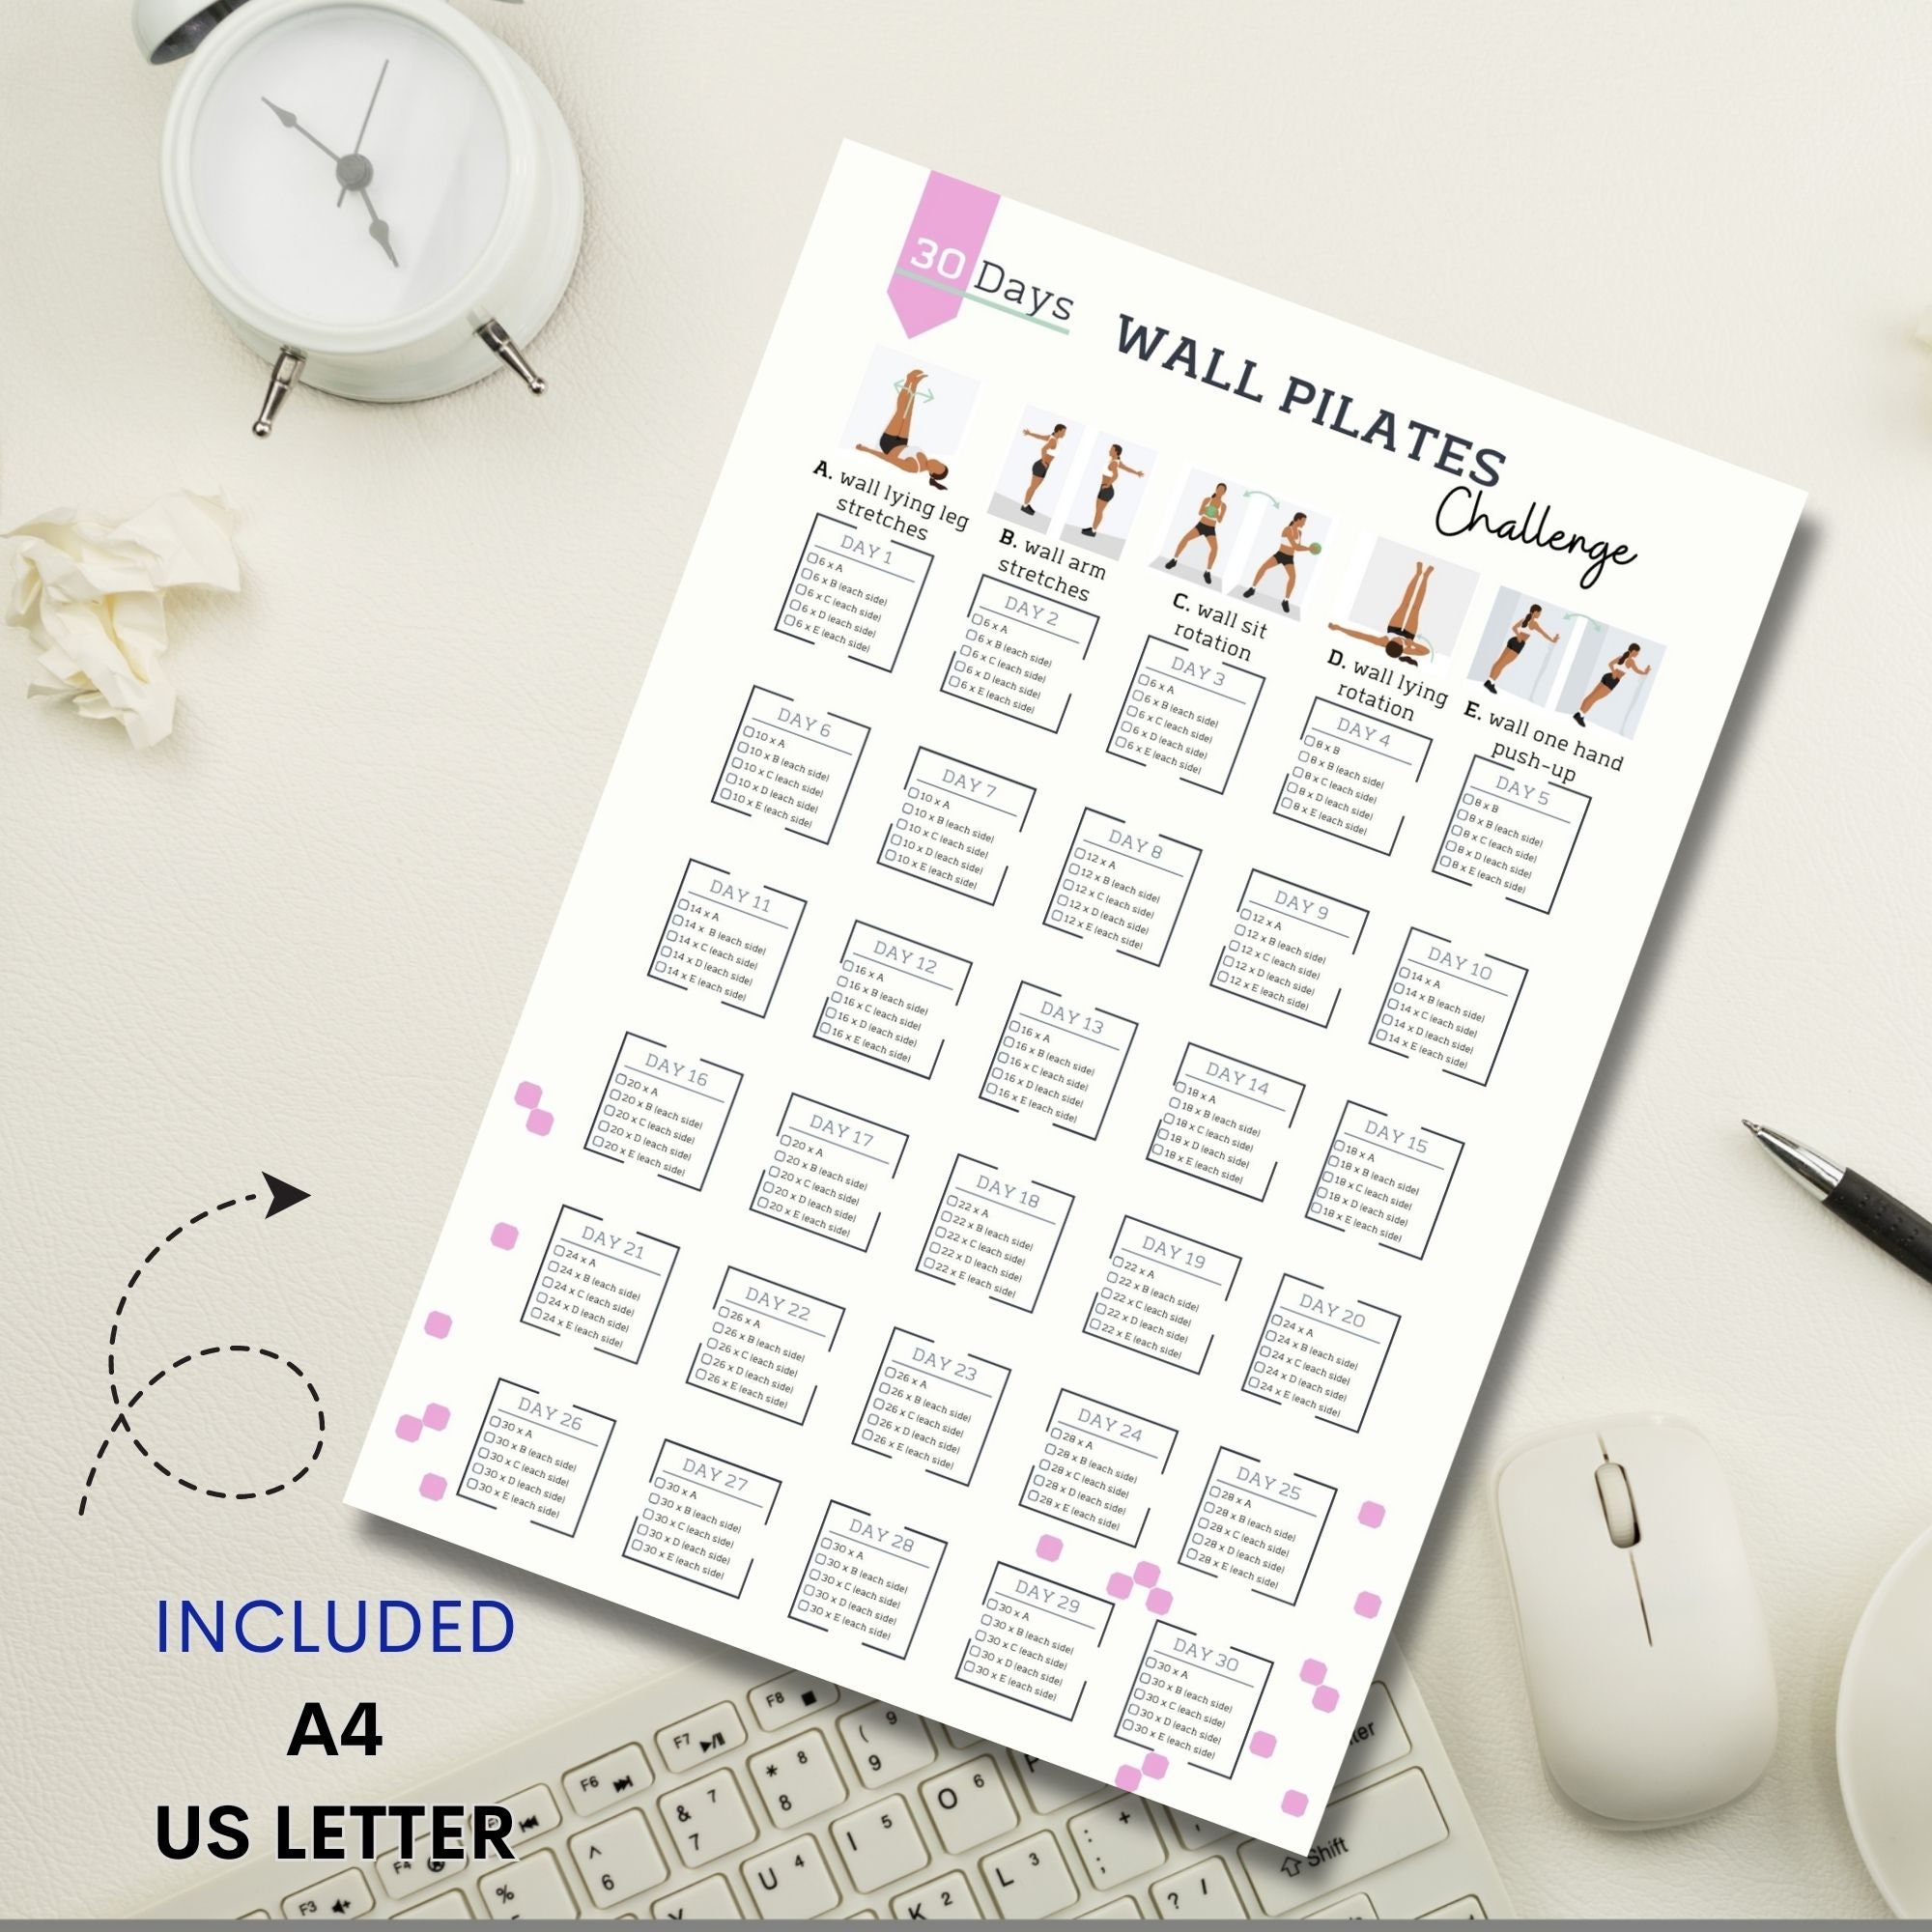 Buy 30 Day Wall Pilates Challenge Wall Pilates Workout Digital Quick Pilates  Wall Exercise Guide Wall Fitness PDF A4&USL Online in India 